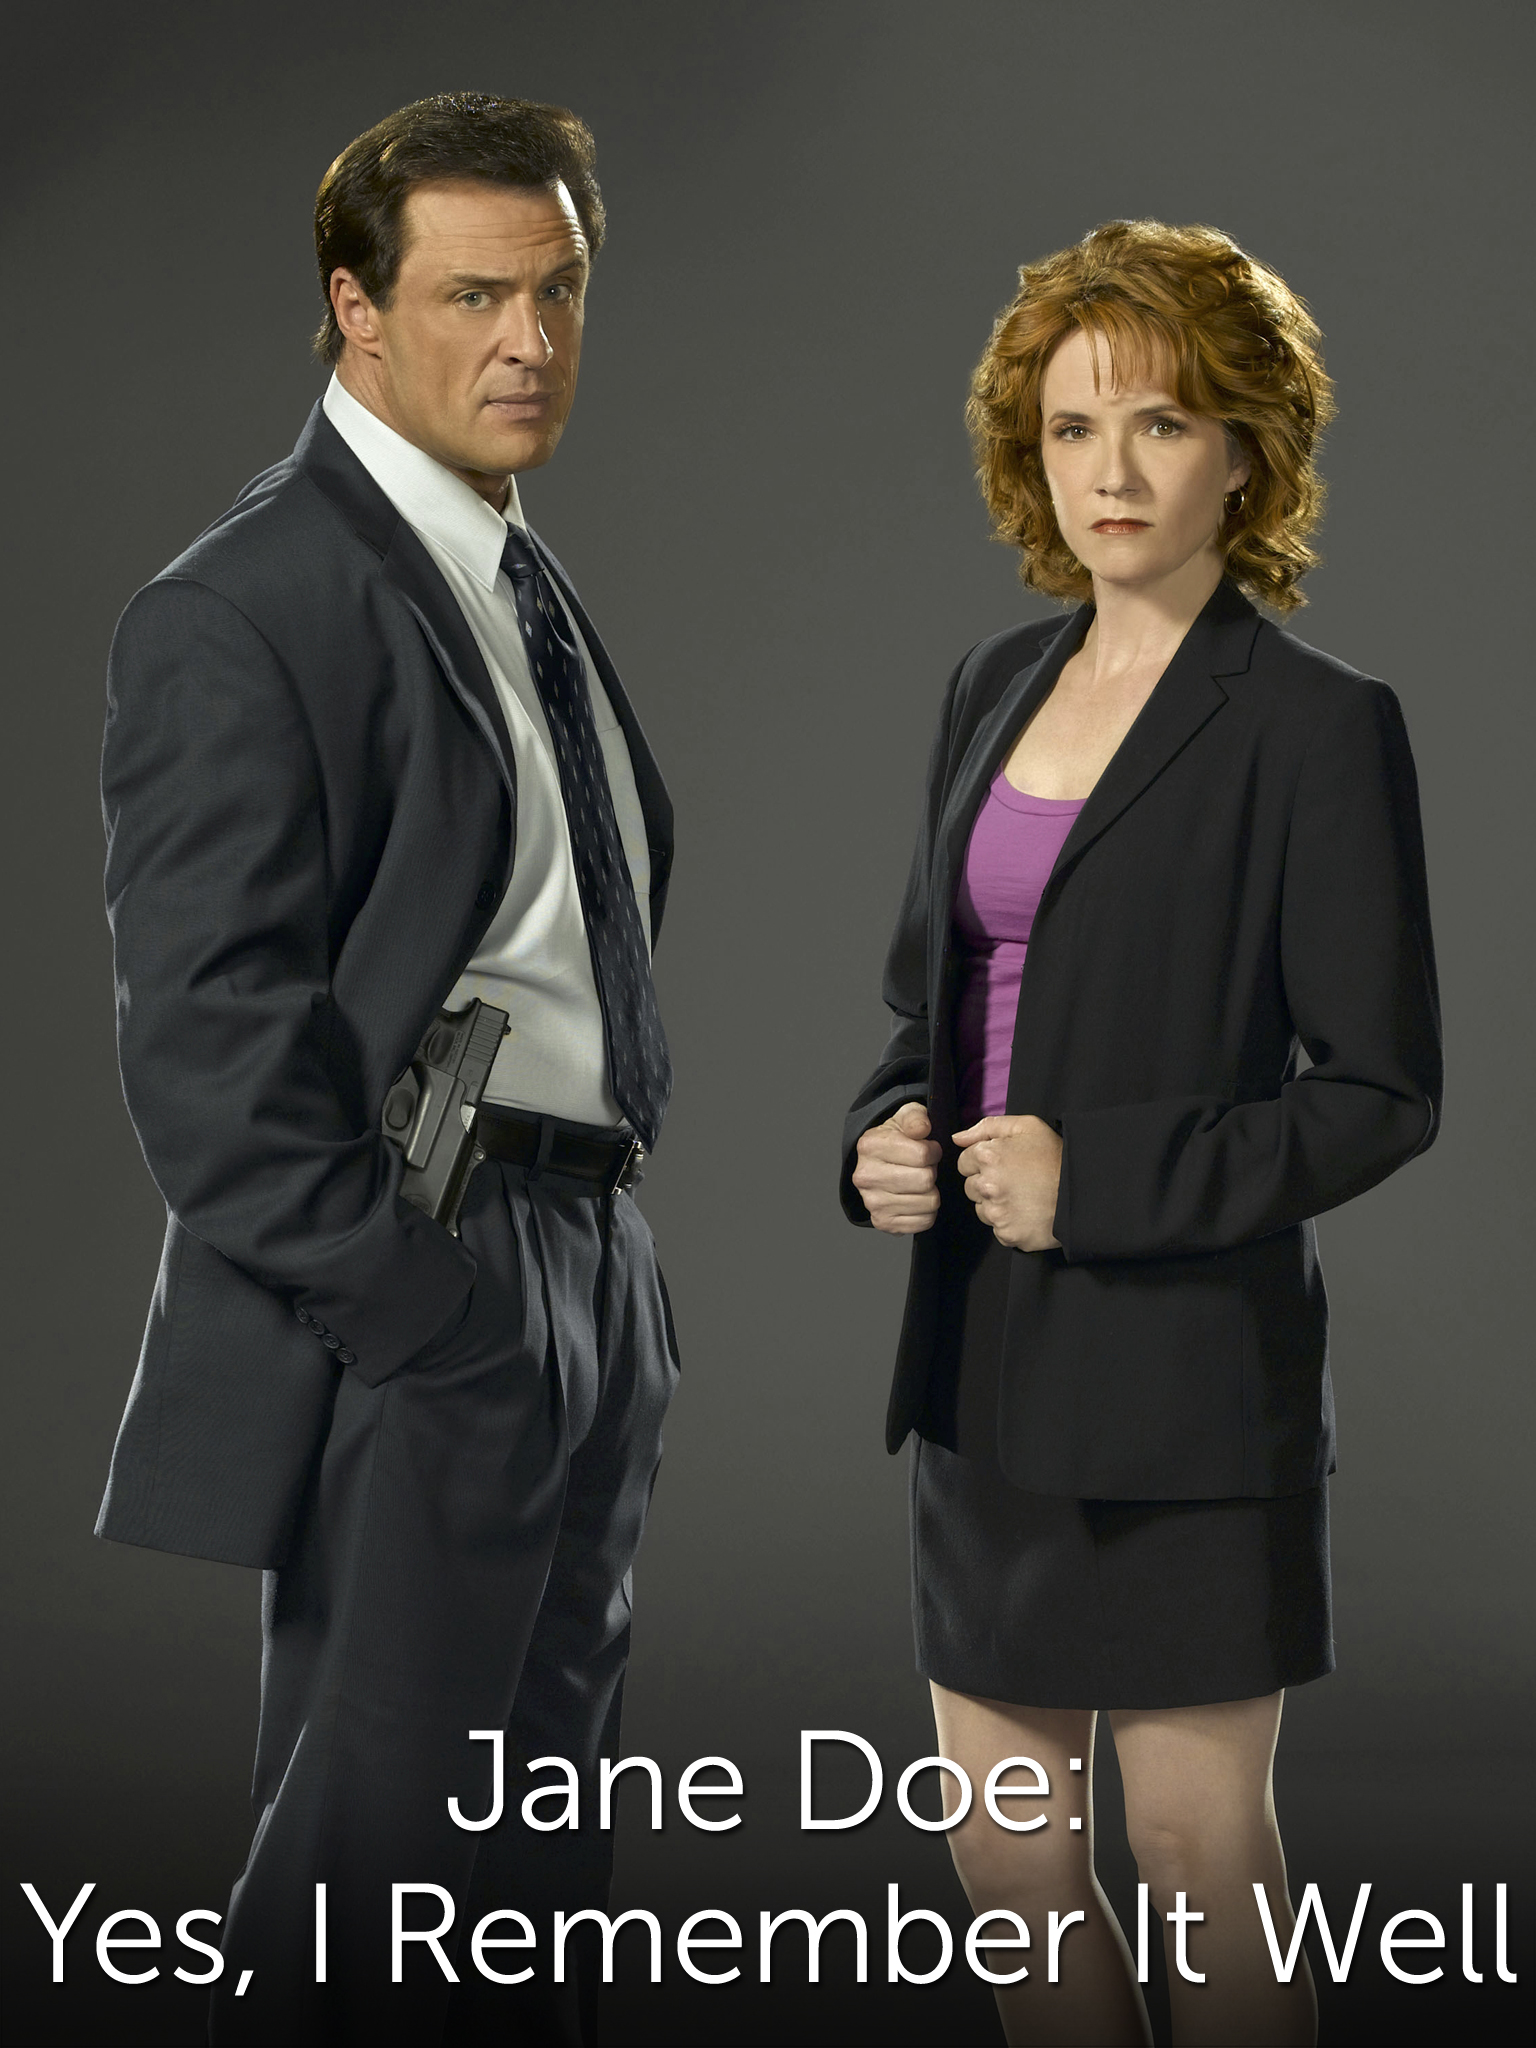 Learn more about the full cast of Jane Doe: Yes, I Remember It Well...